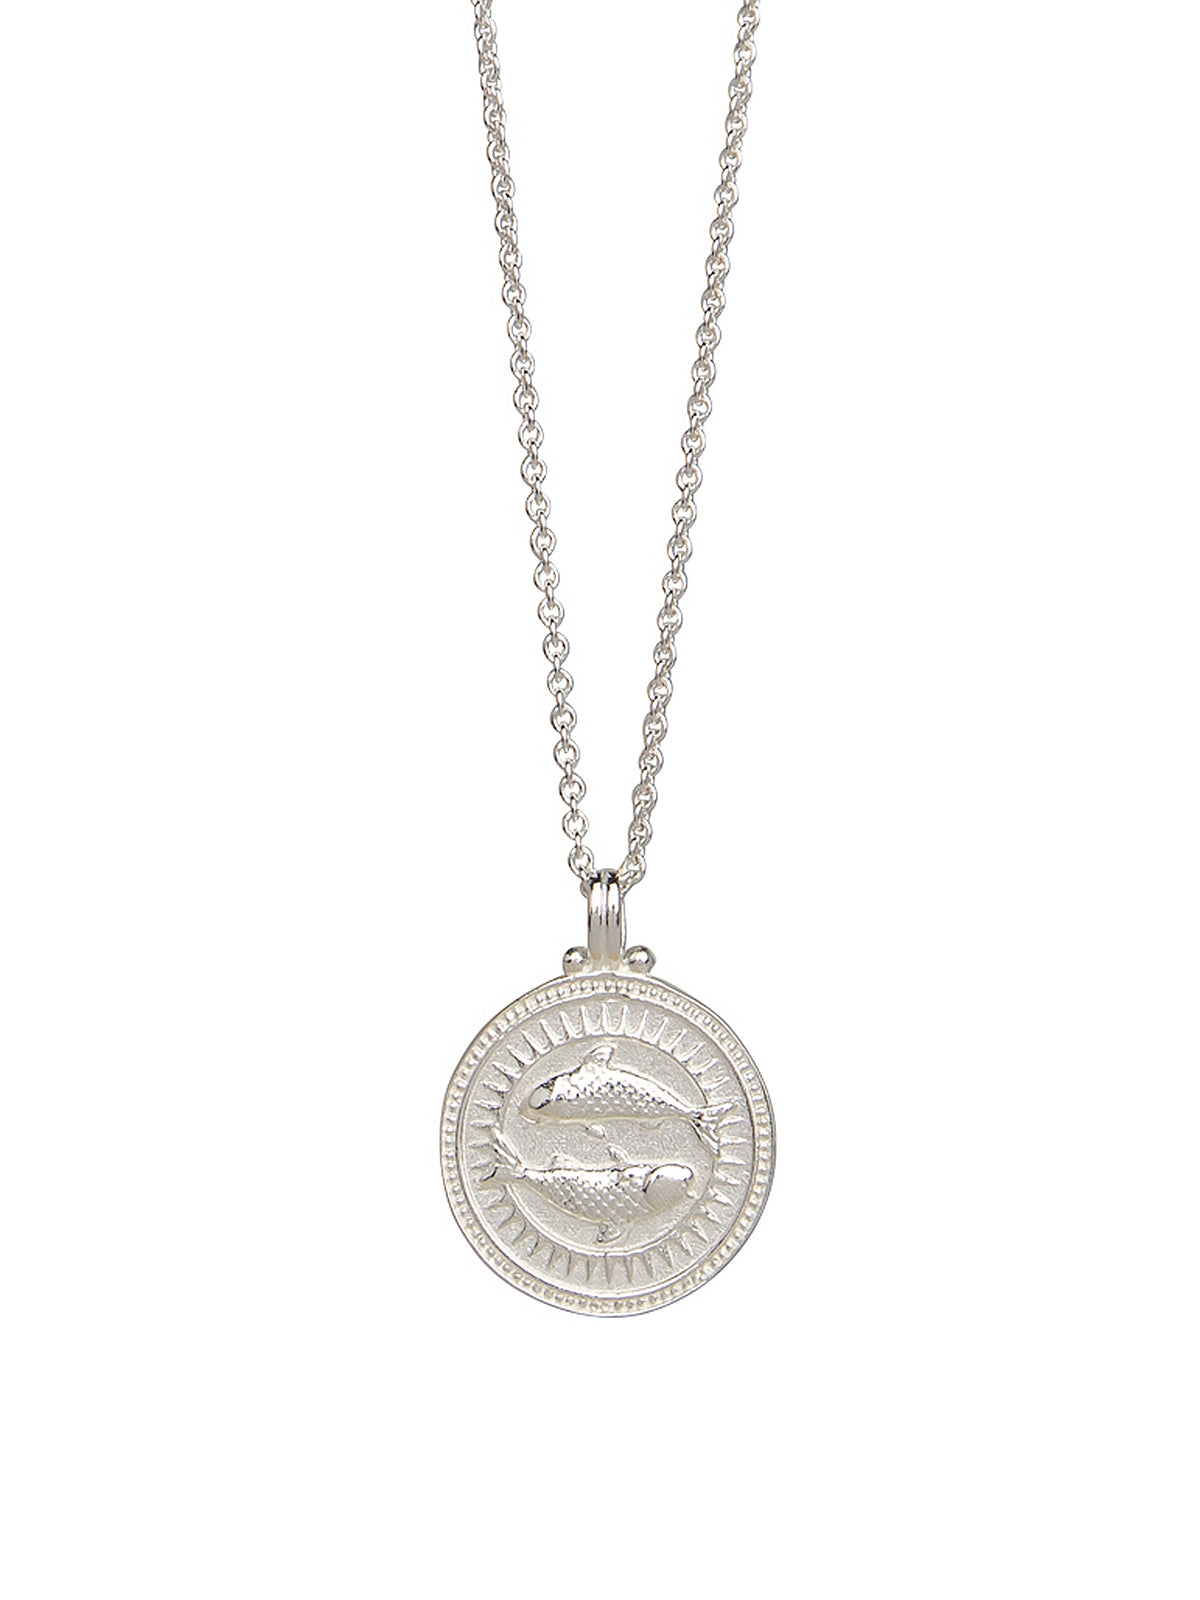 Pisces Zodiac Horoscope Necklace. Gender Neutral. Sterling Silver